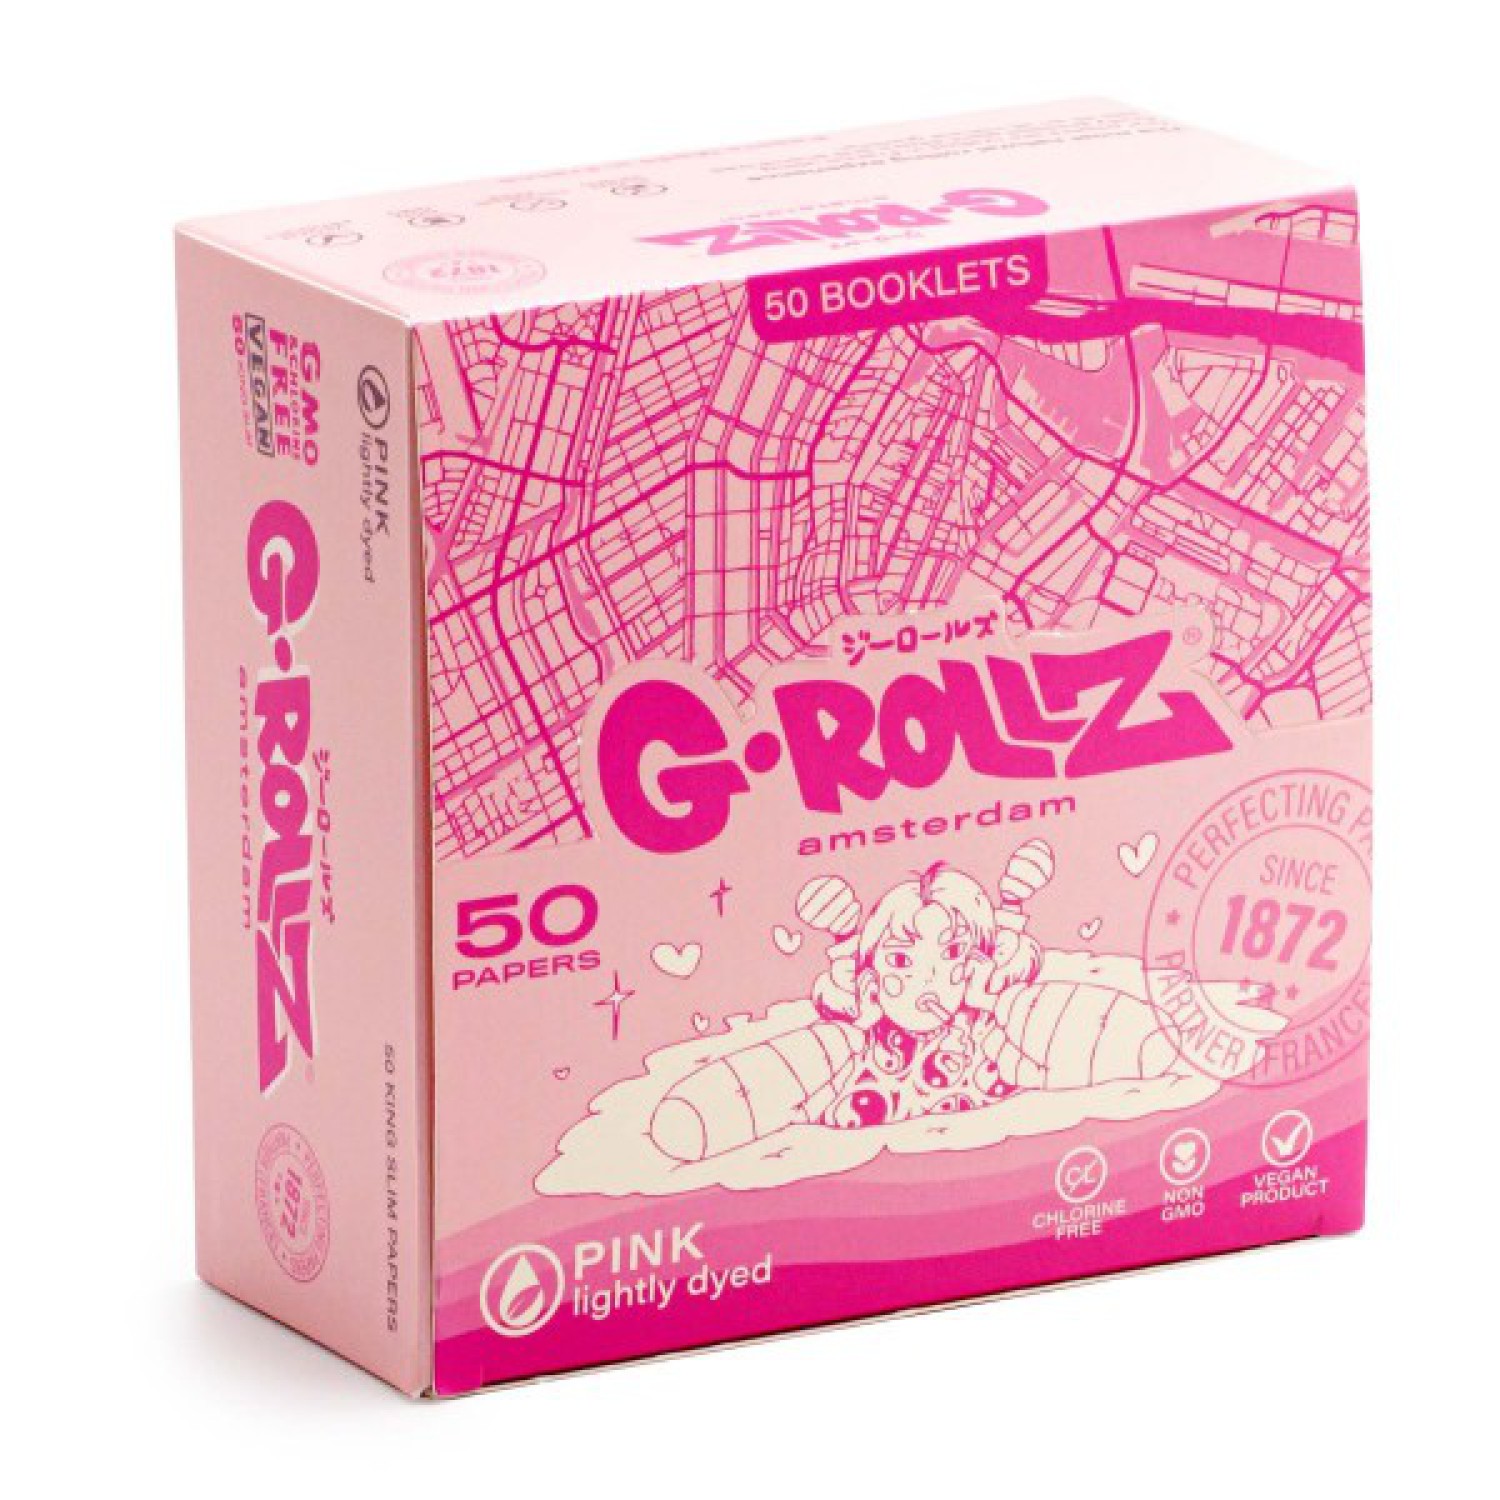 G-ROLLZ | Lightly Dyed Pink - 50 KS Papers (50 Booklets Display)